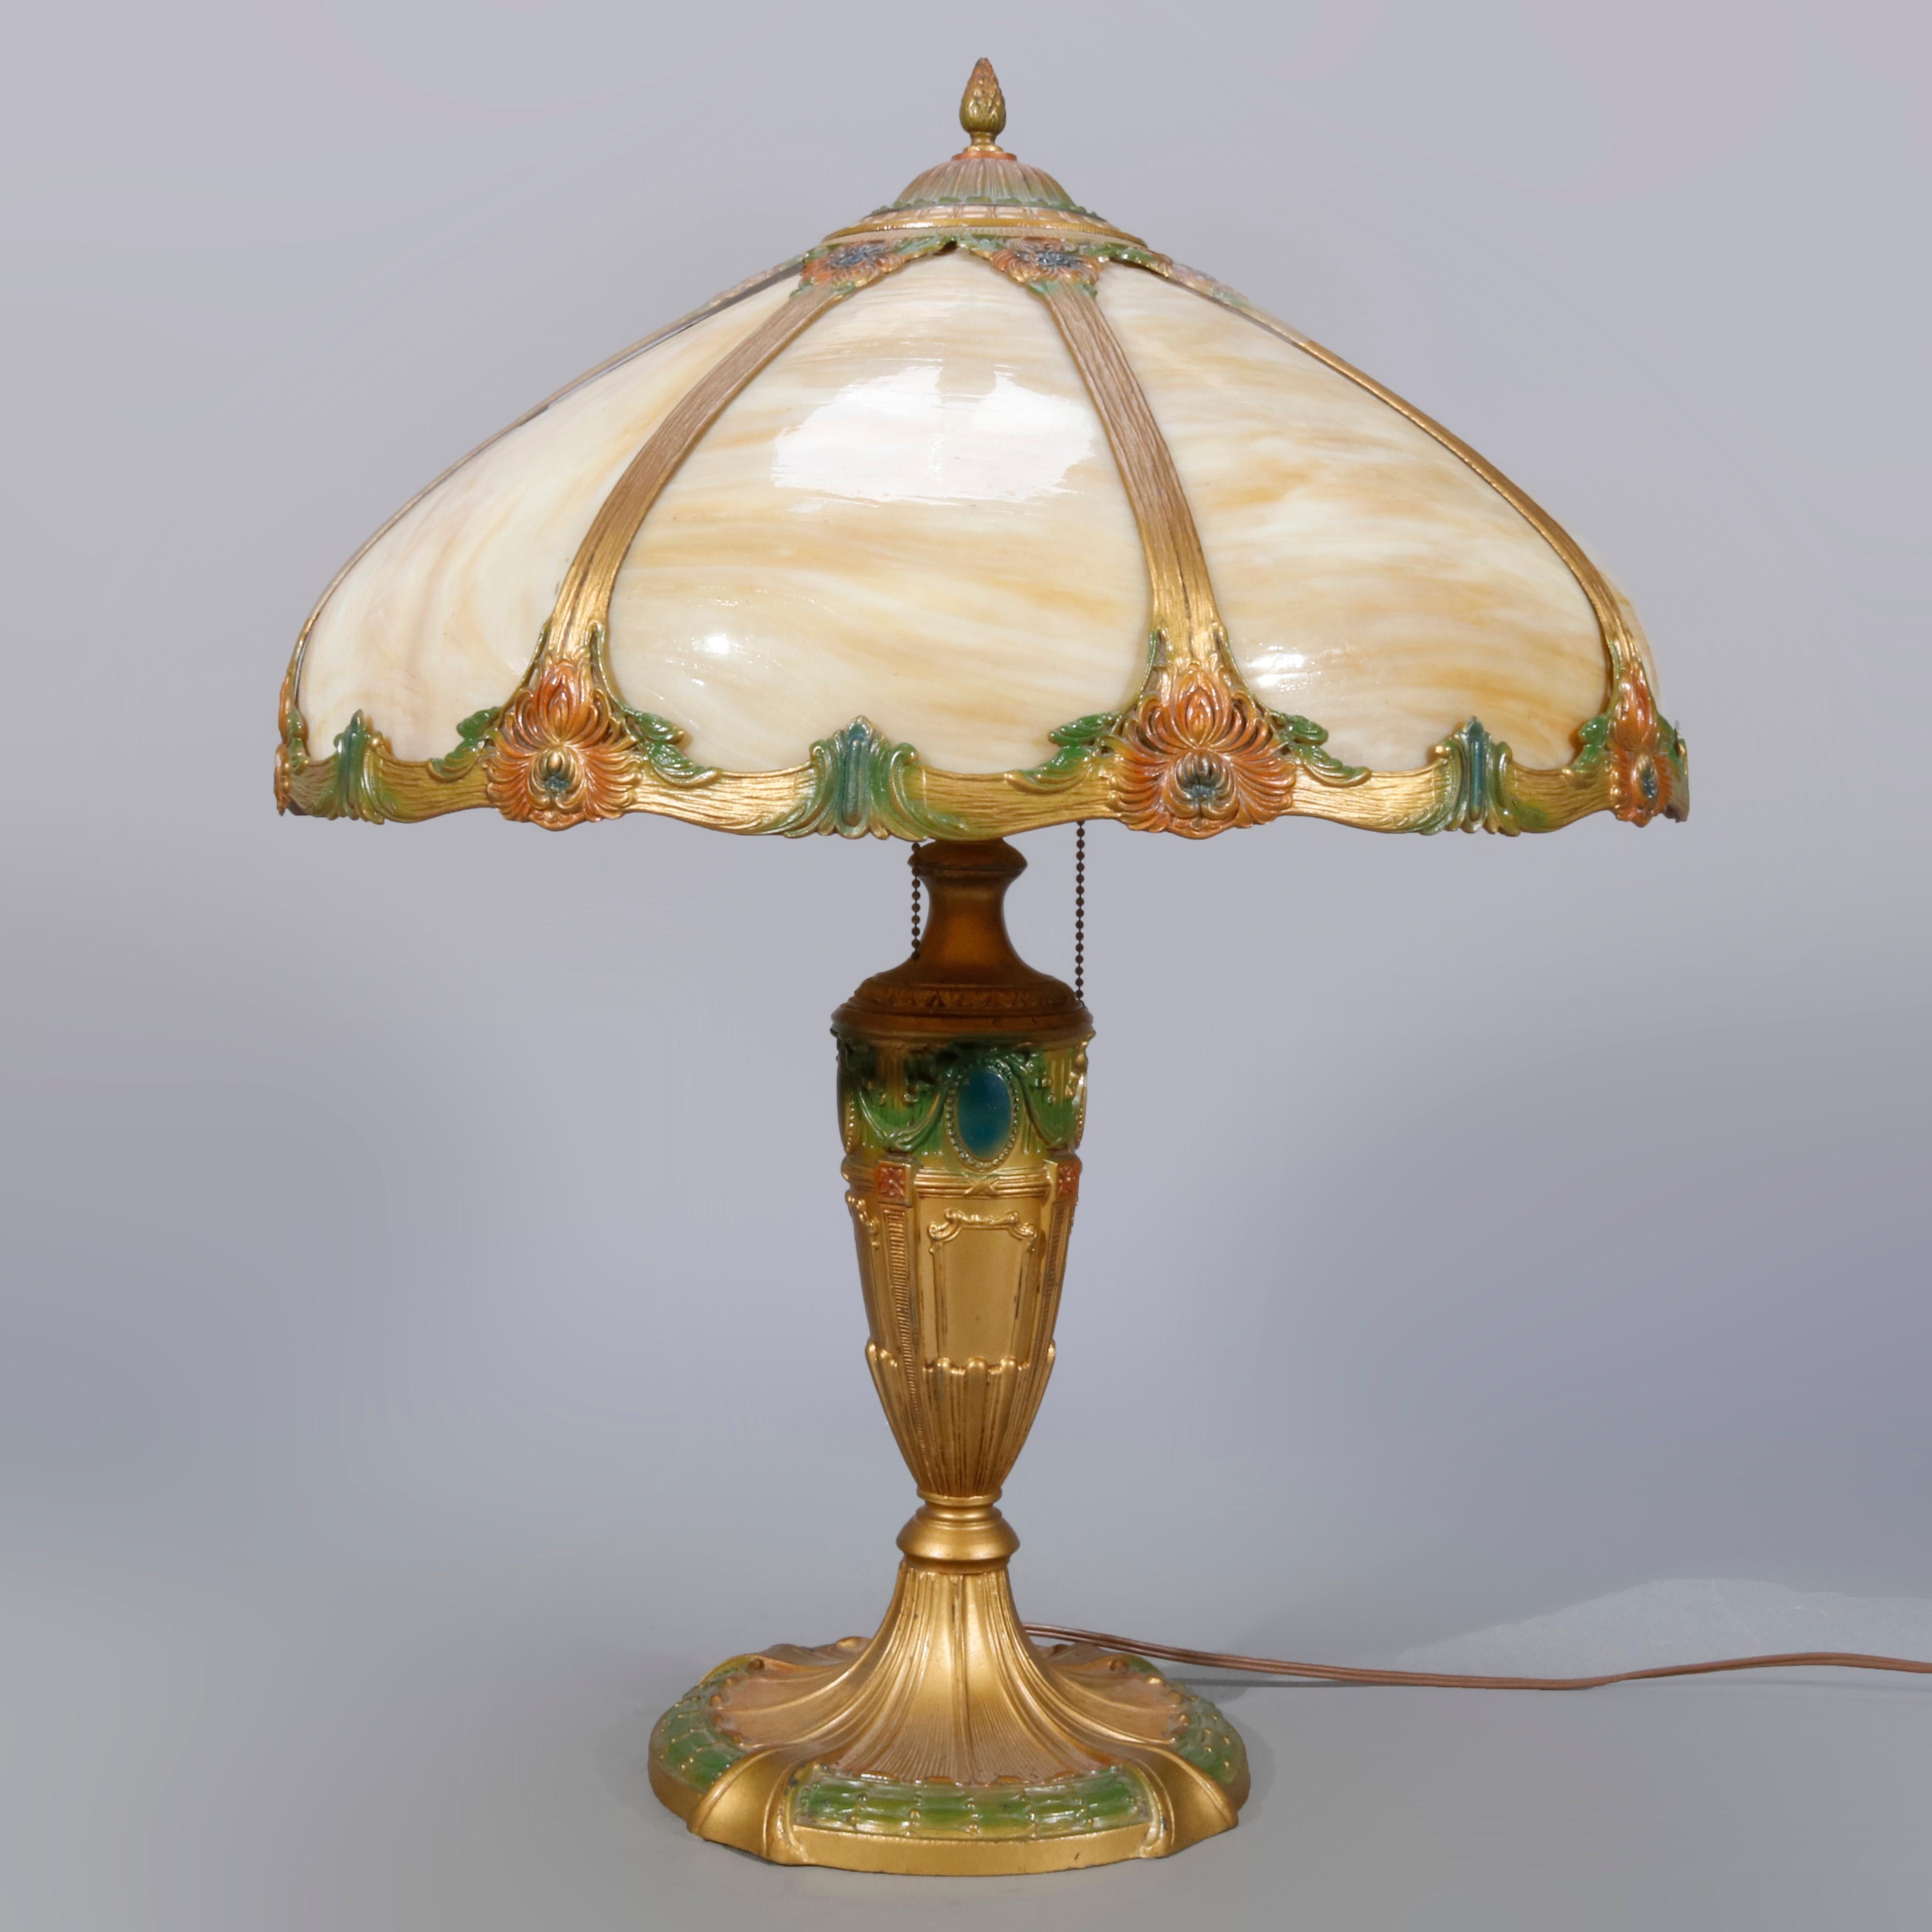 An antique Arts & Crafts table lamp offers domed shade with curved slag glass panels over double socket cast urn form base with polychromed floral elements, 